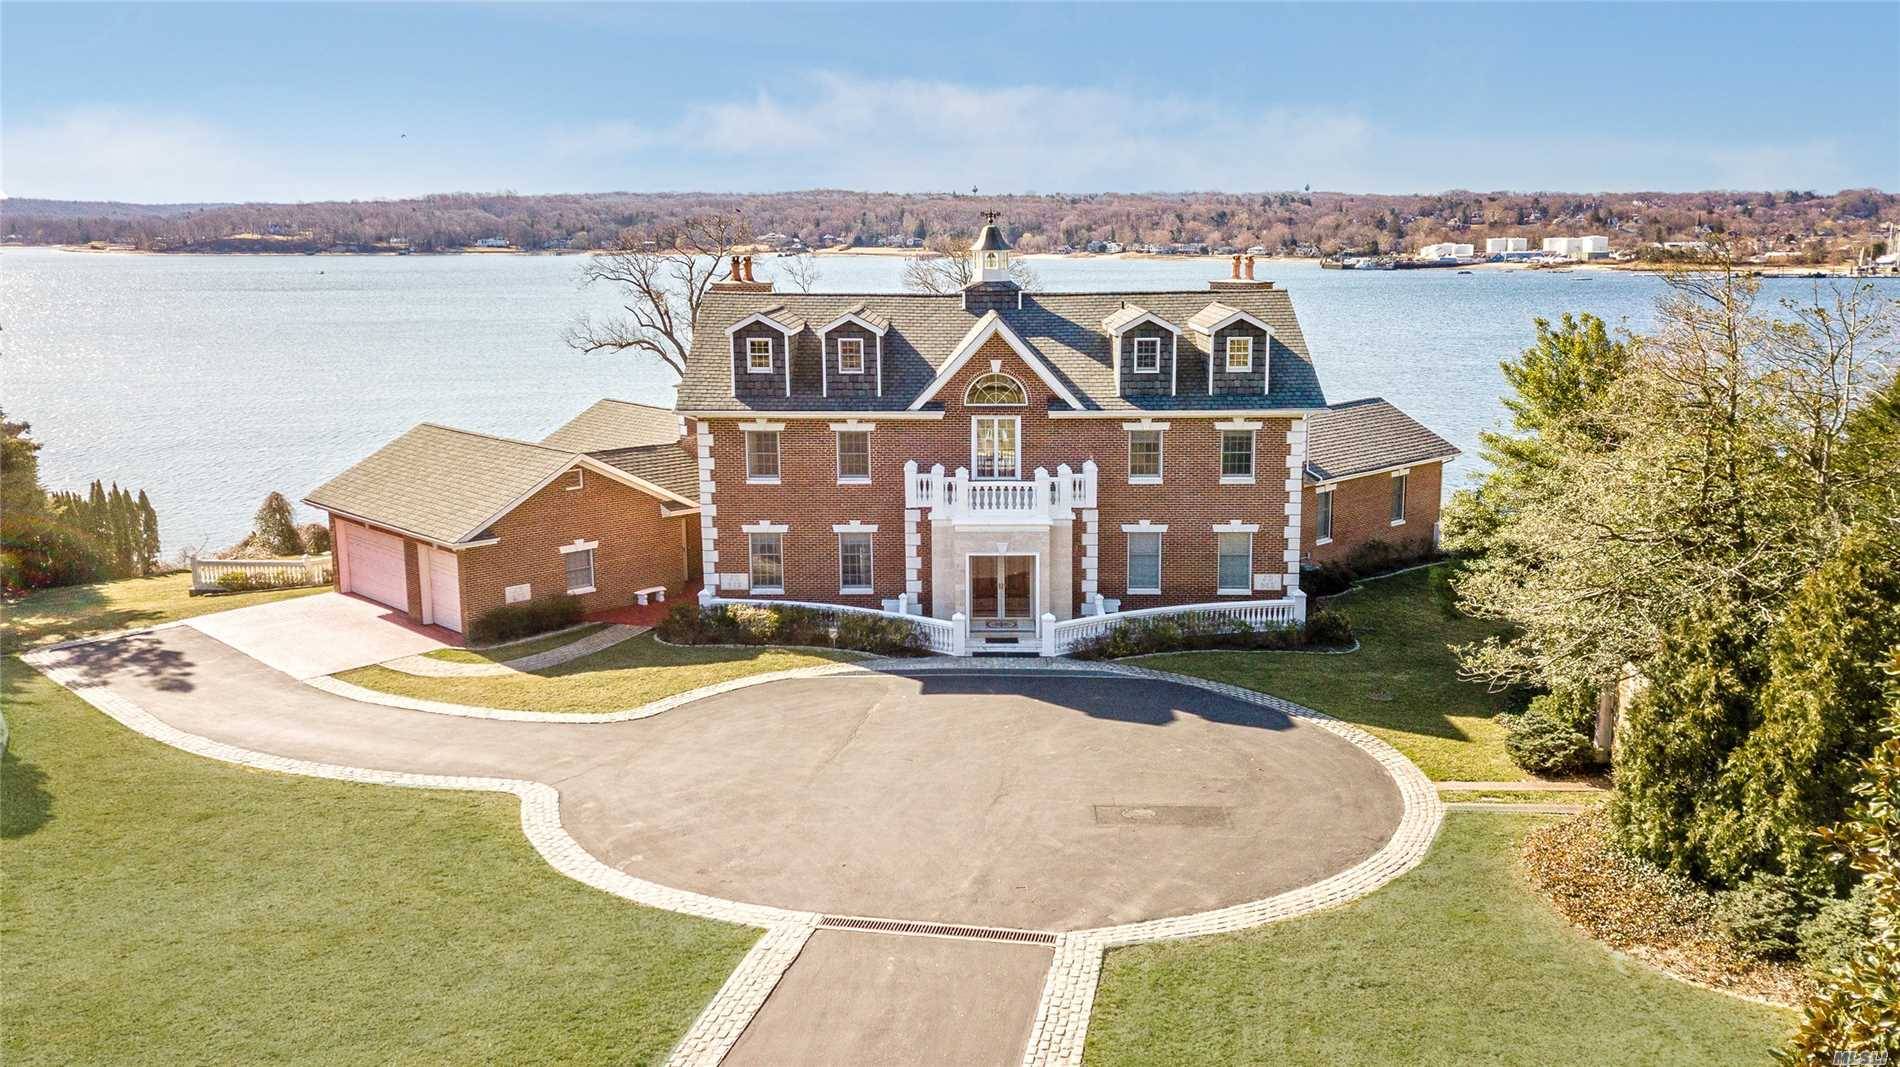 Centre Island, Stately Brick Colonial Style Manor Home, Perched On 3.